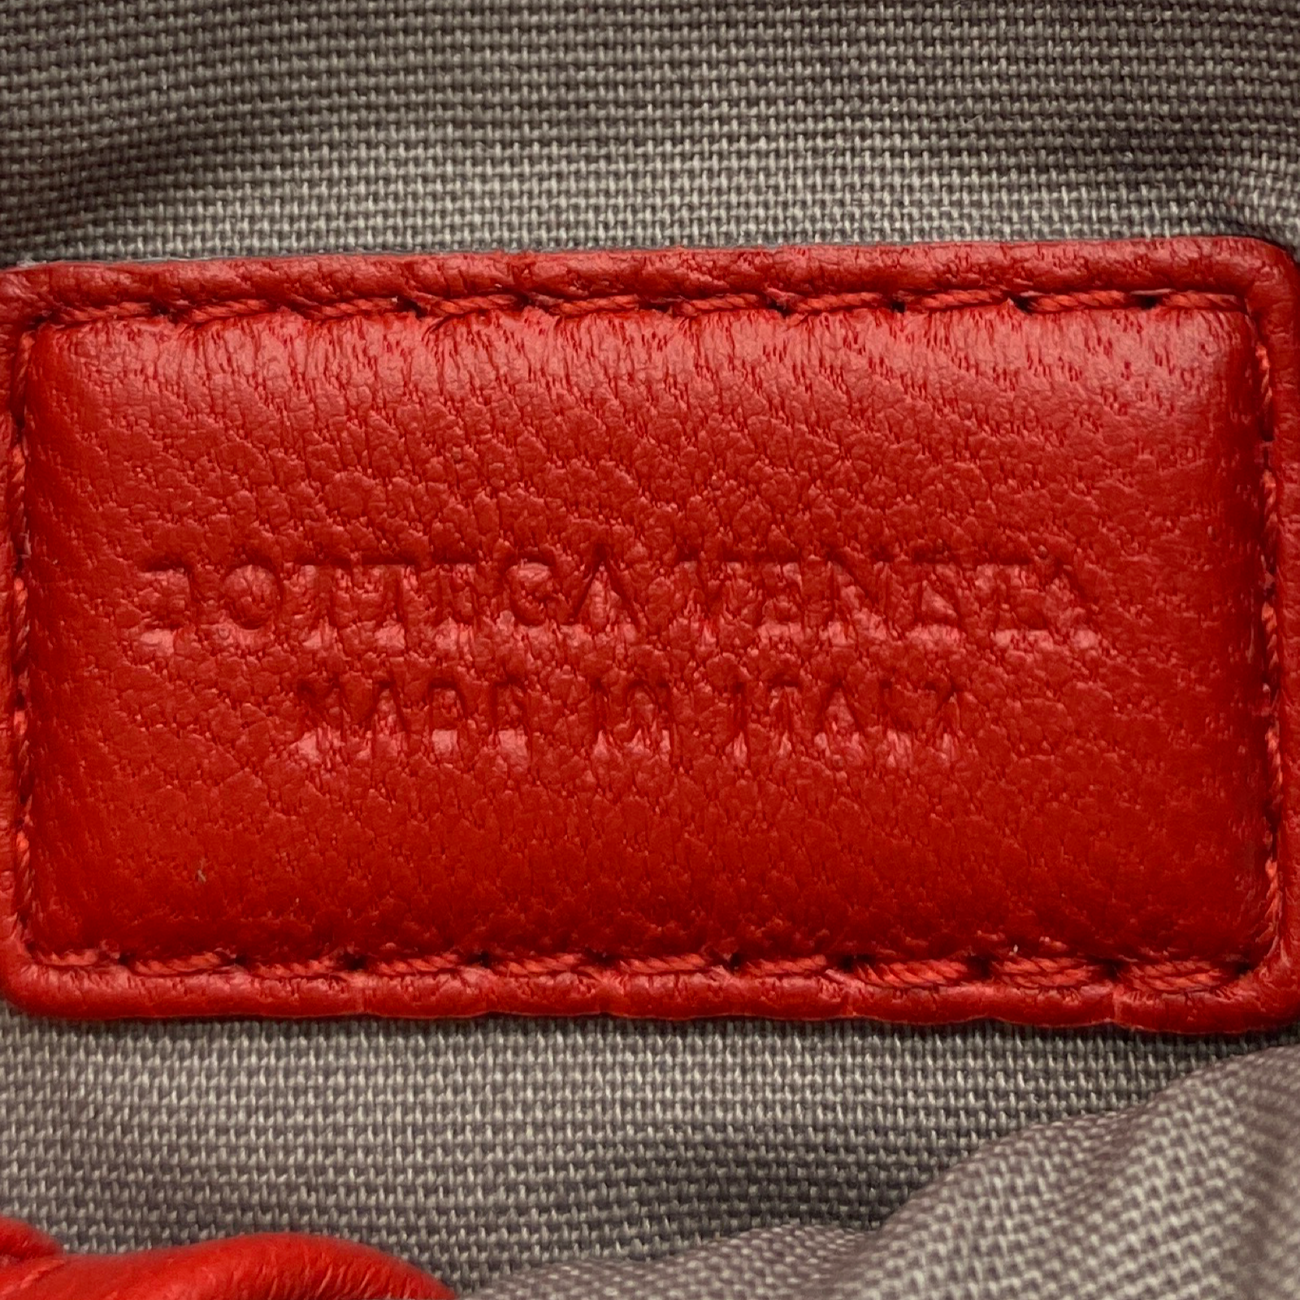 Where's the serial number code in this wallet/pocket organizer? I